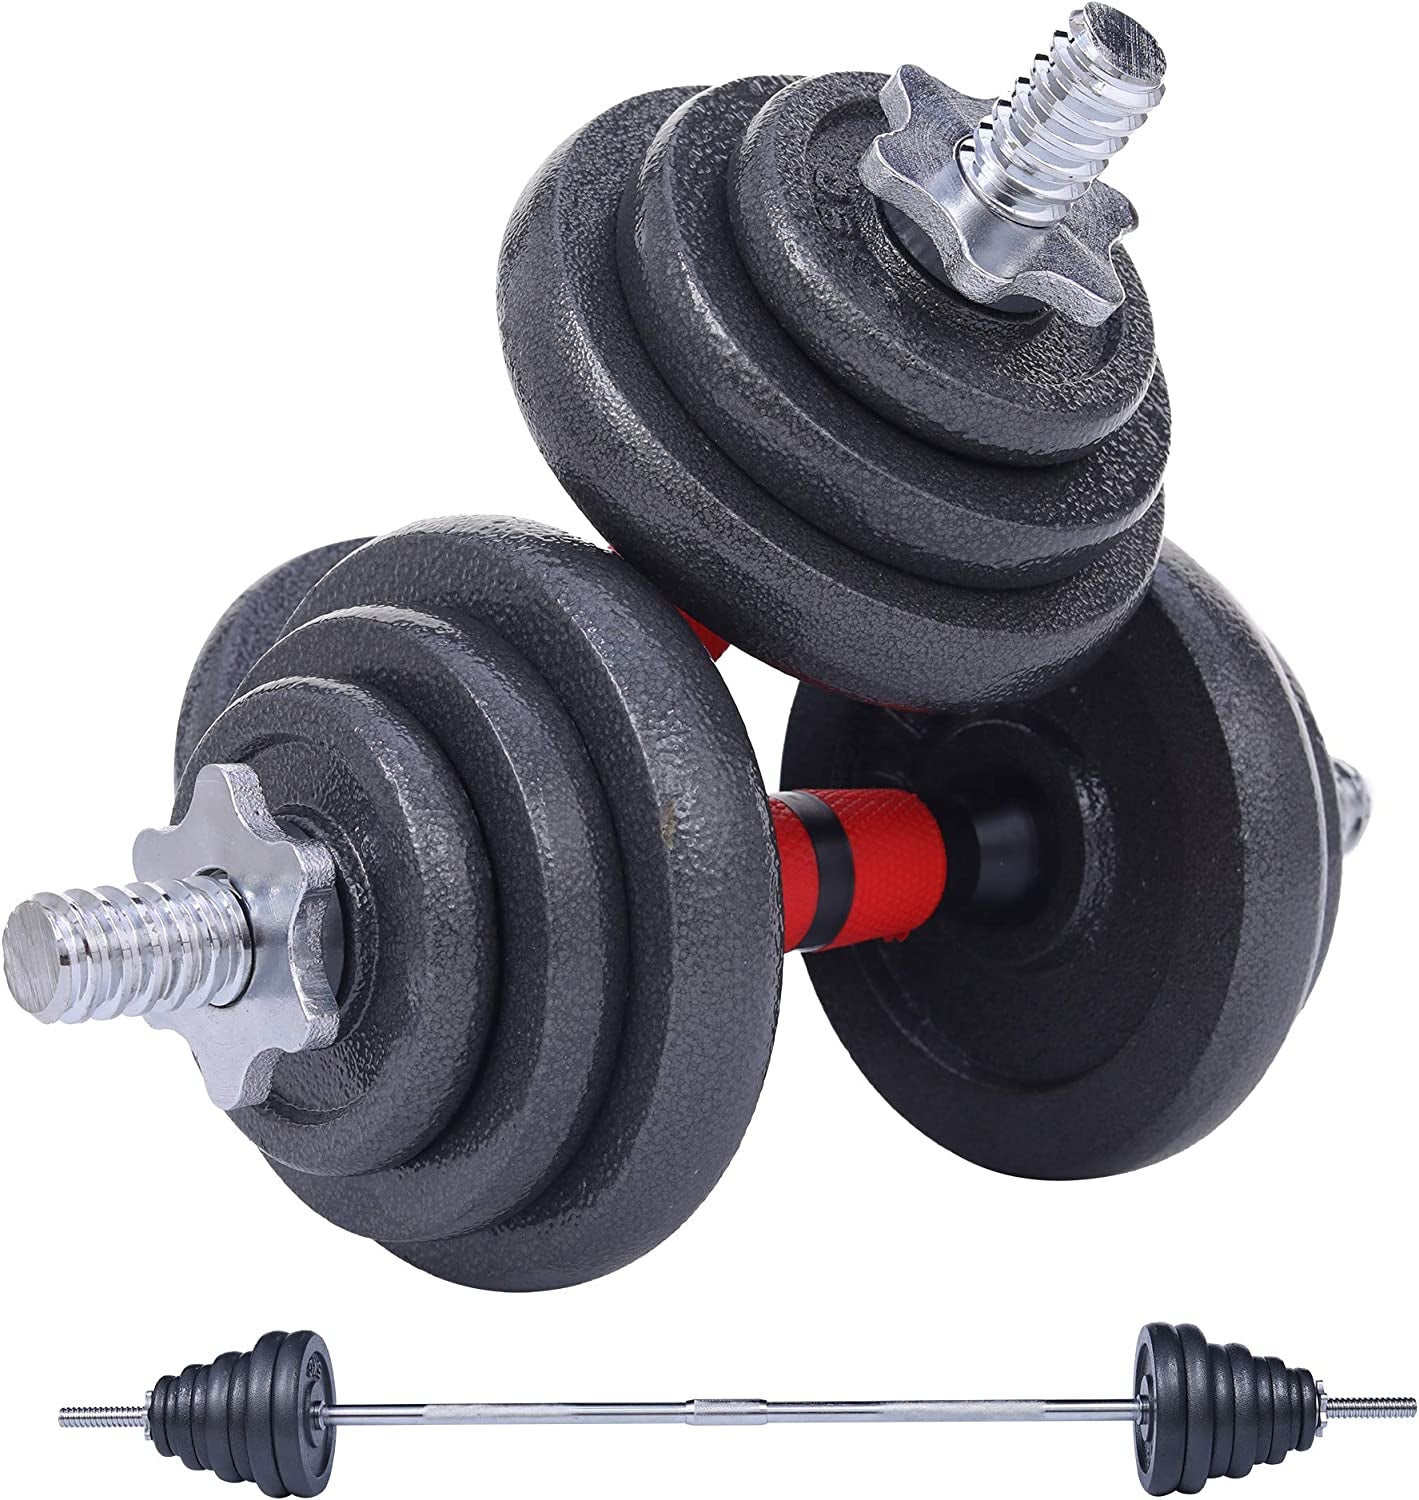 Nice C Barbell Weight Set, Dumbbell Set, Weights Adjustable 22/33/44/66/105 Lbs Home Gym 2 in 1, Anti-Slip Handle, All-Purpose, Office, Fitness